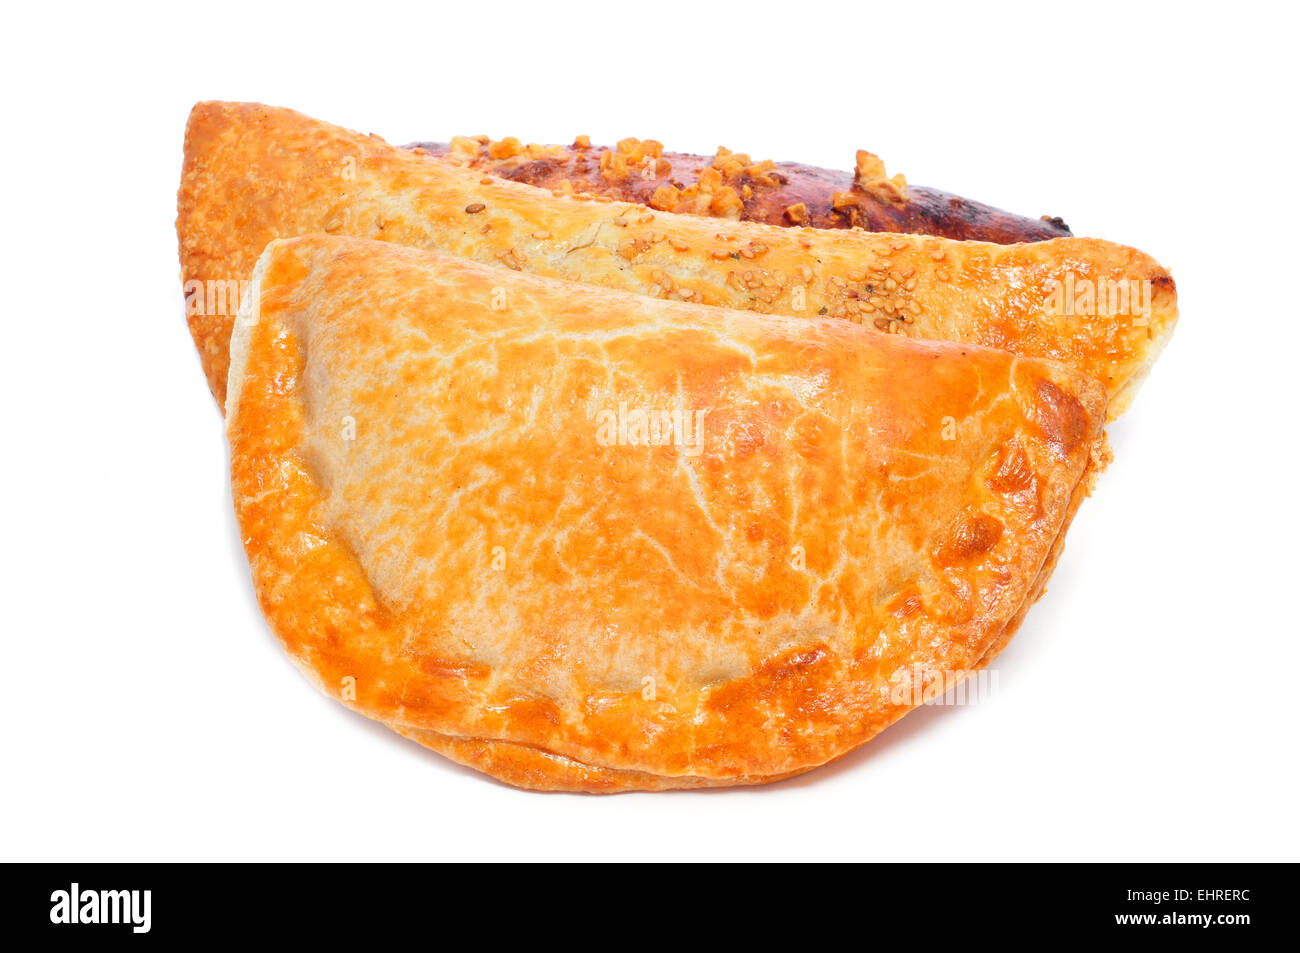 some different empanadas argentinas, typical argentine stuffed pastries, on a white background Stock Photo